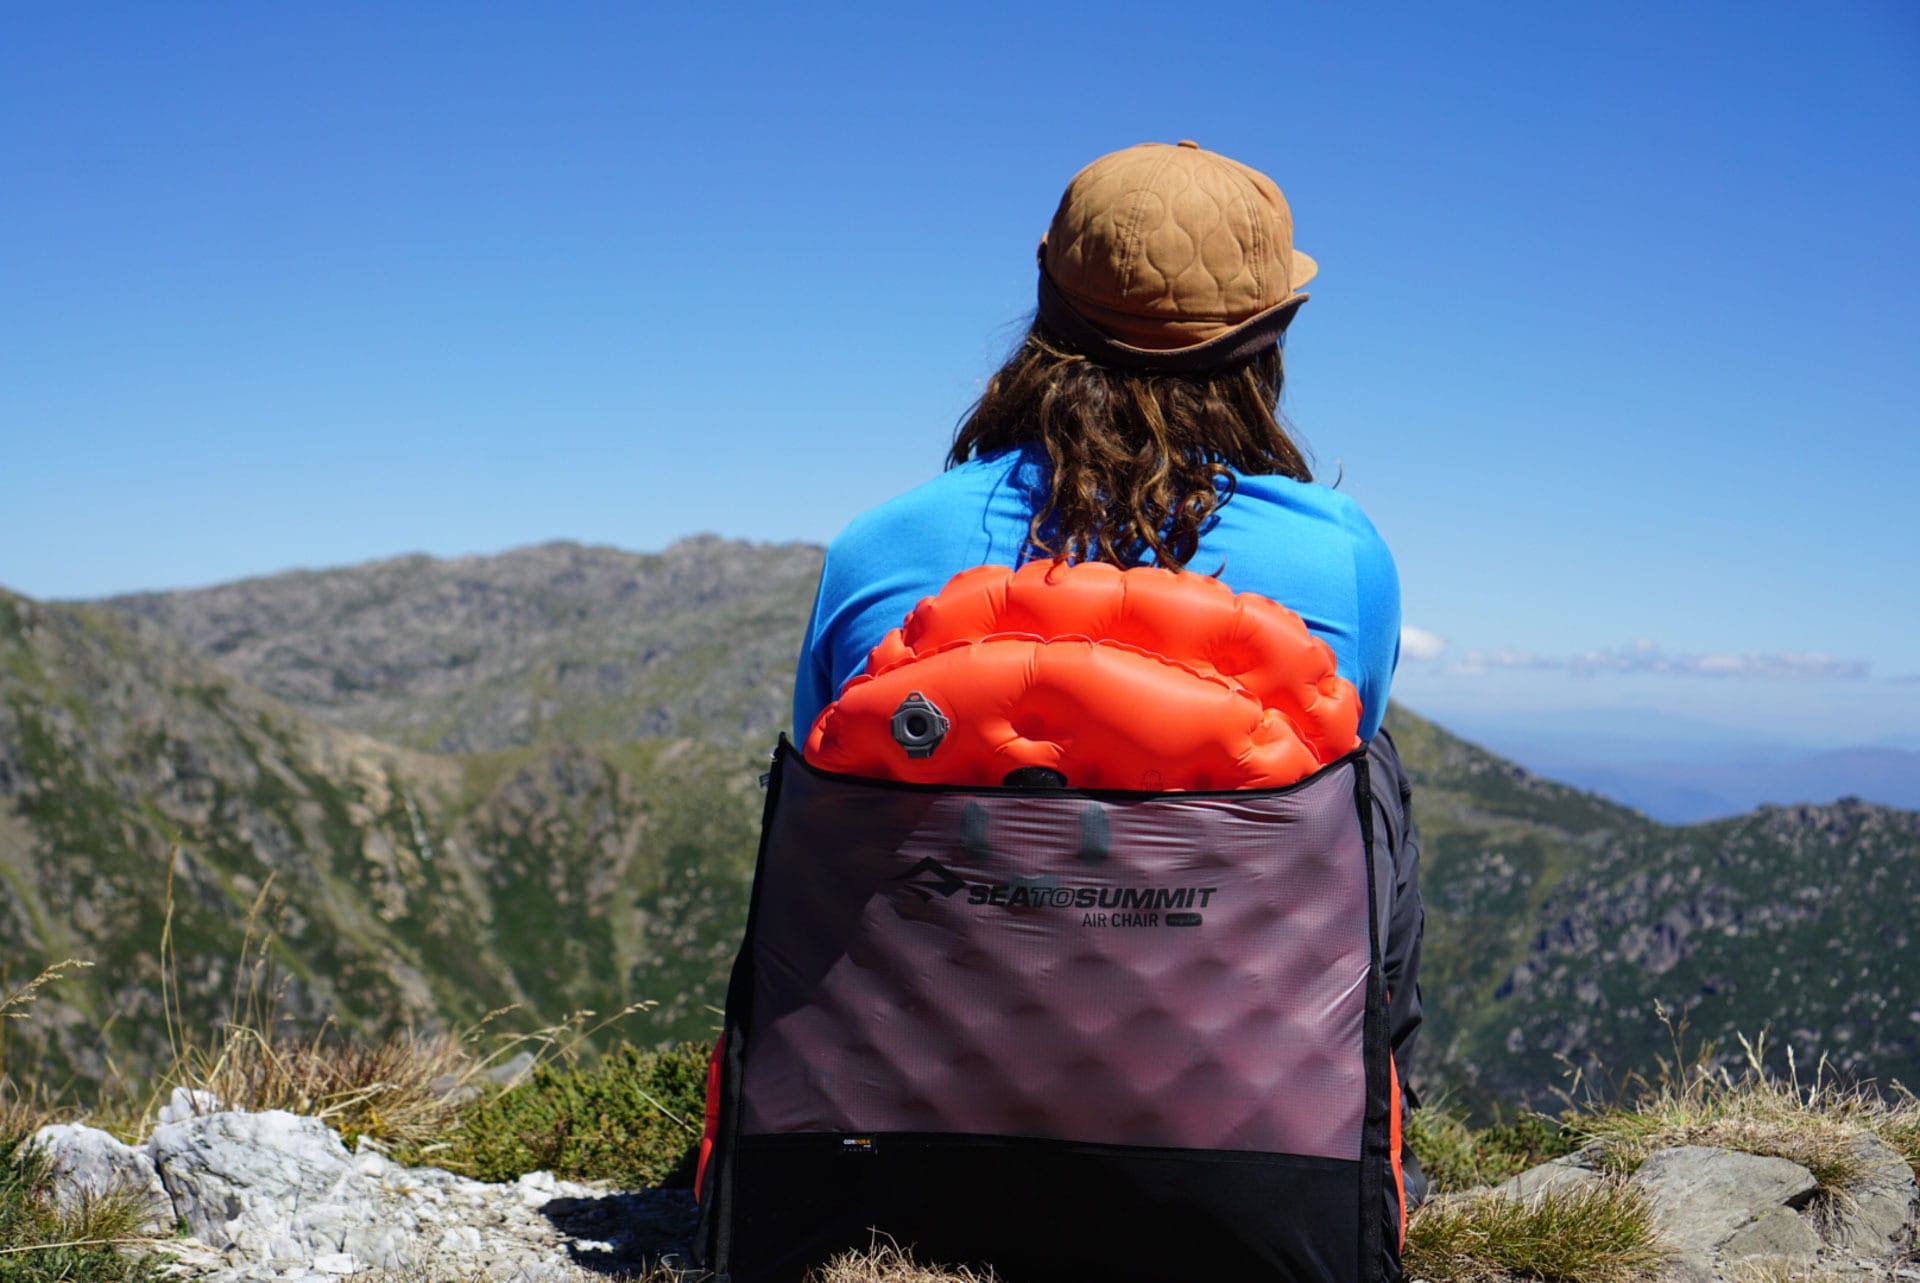 Sea to Summit Air Chair – Reviewed & Tested - We Are Explorers